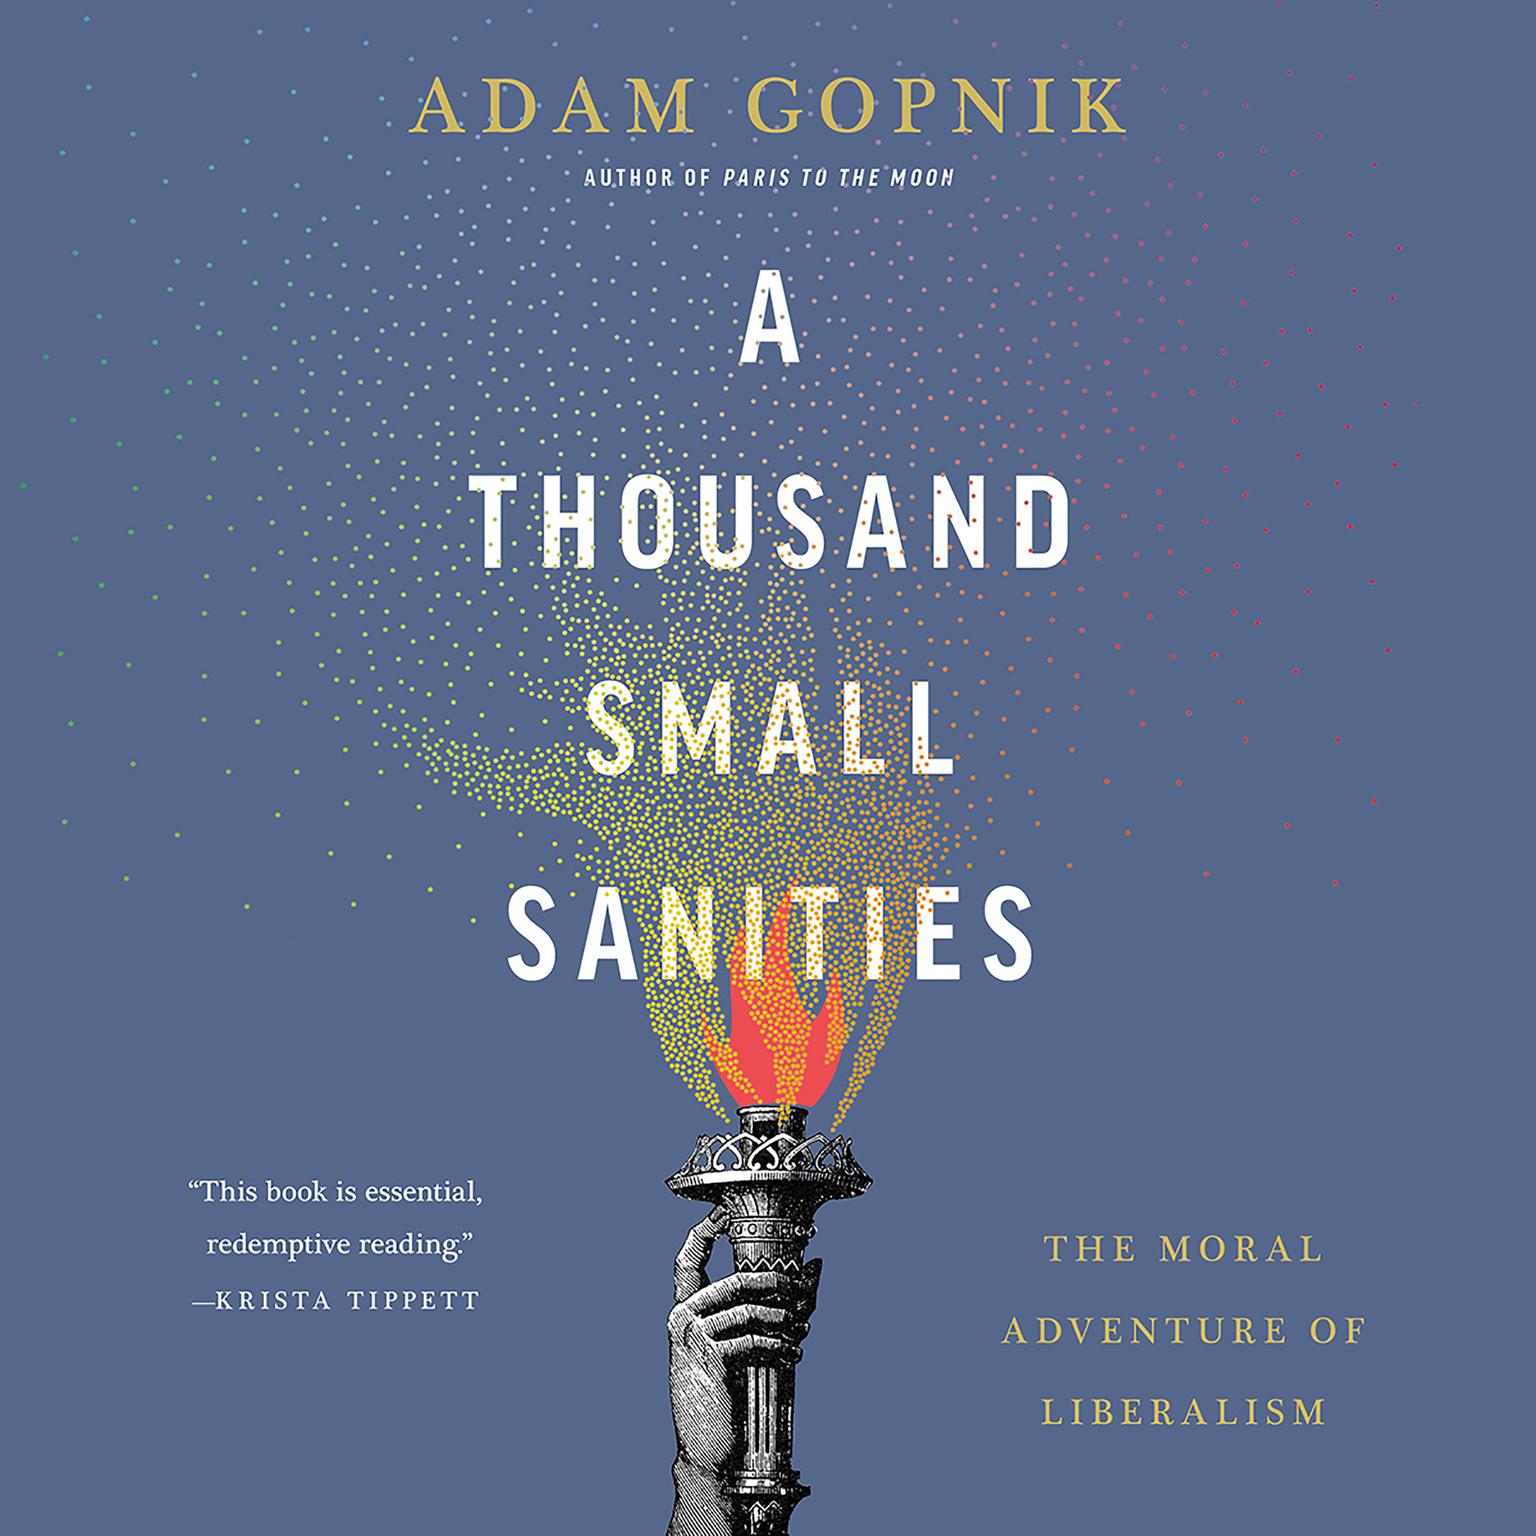 A Thousand Small Sanities: The Moral Adventure of Liberalism Audiobook, by Adam Gopnik